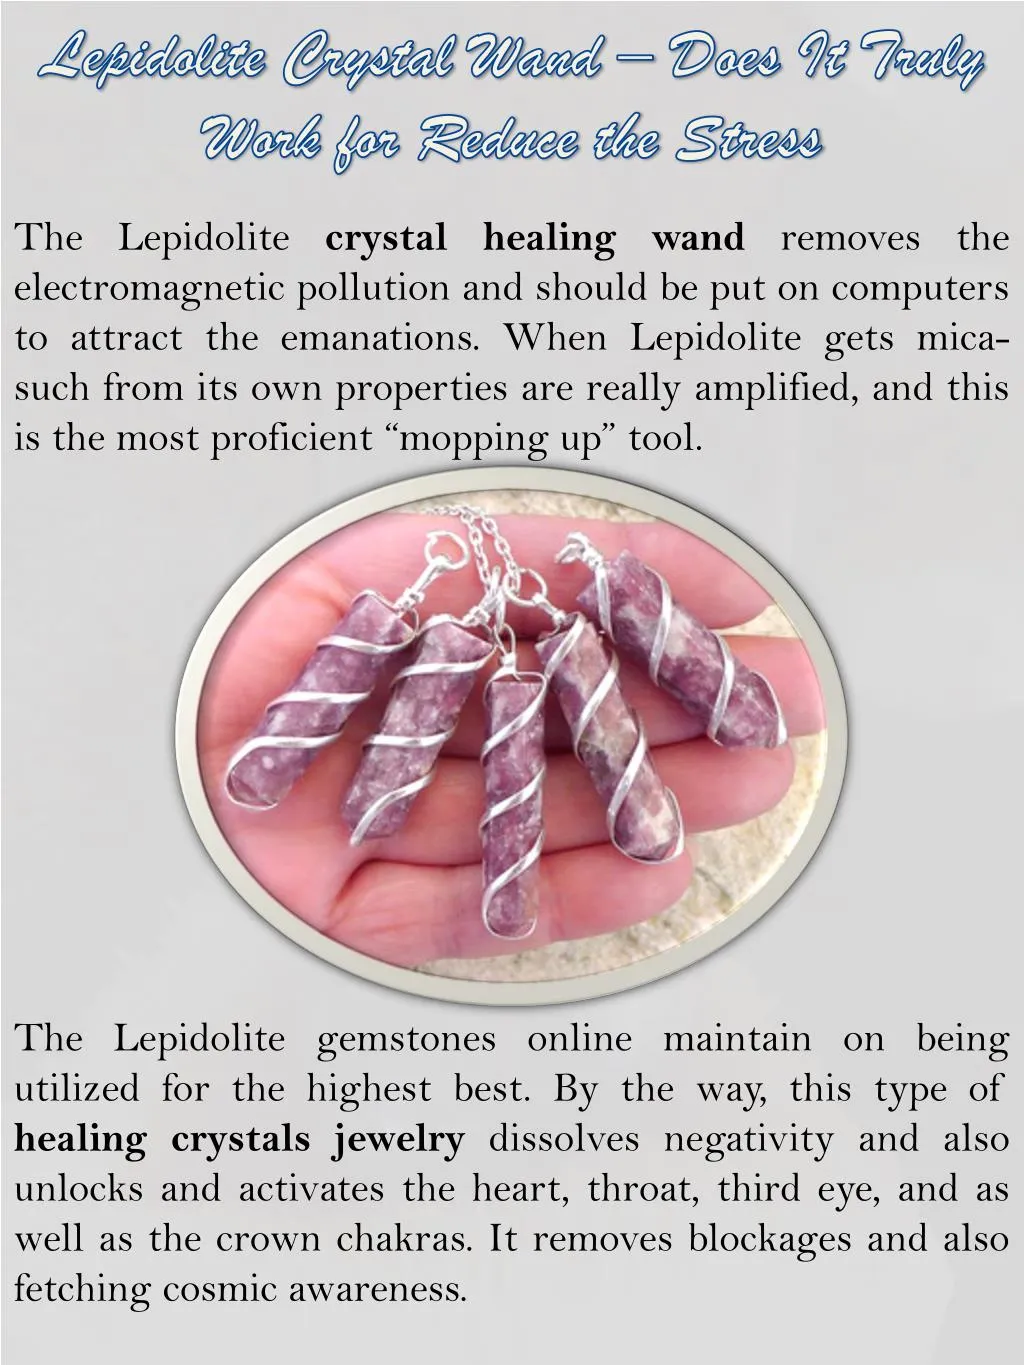 the lepidolite crystal healing wand removes